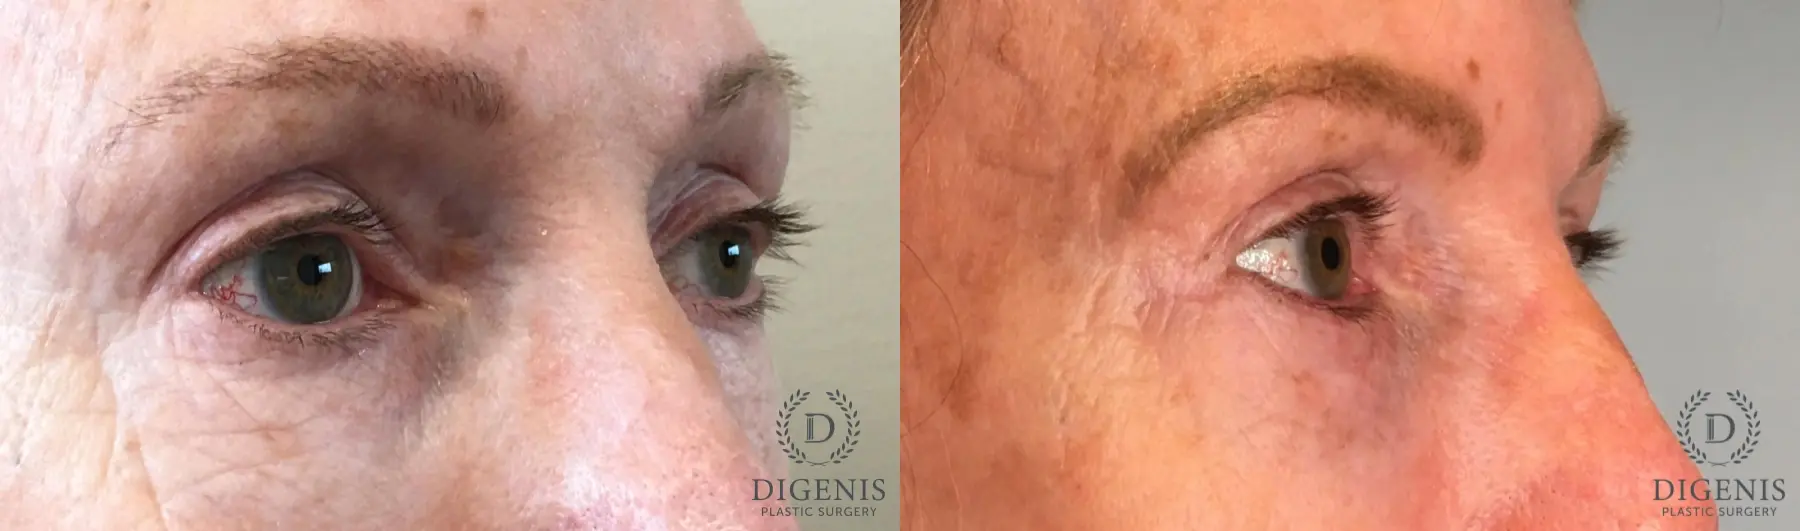 Blepharoplasty: Patient 13 - Before and After 2